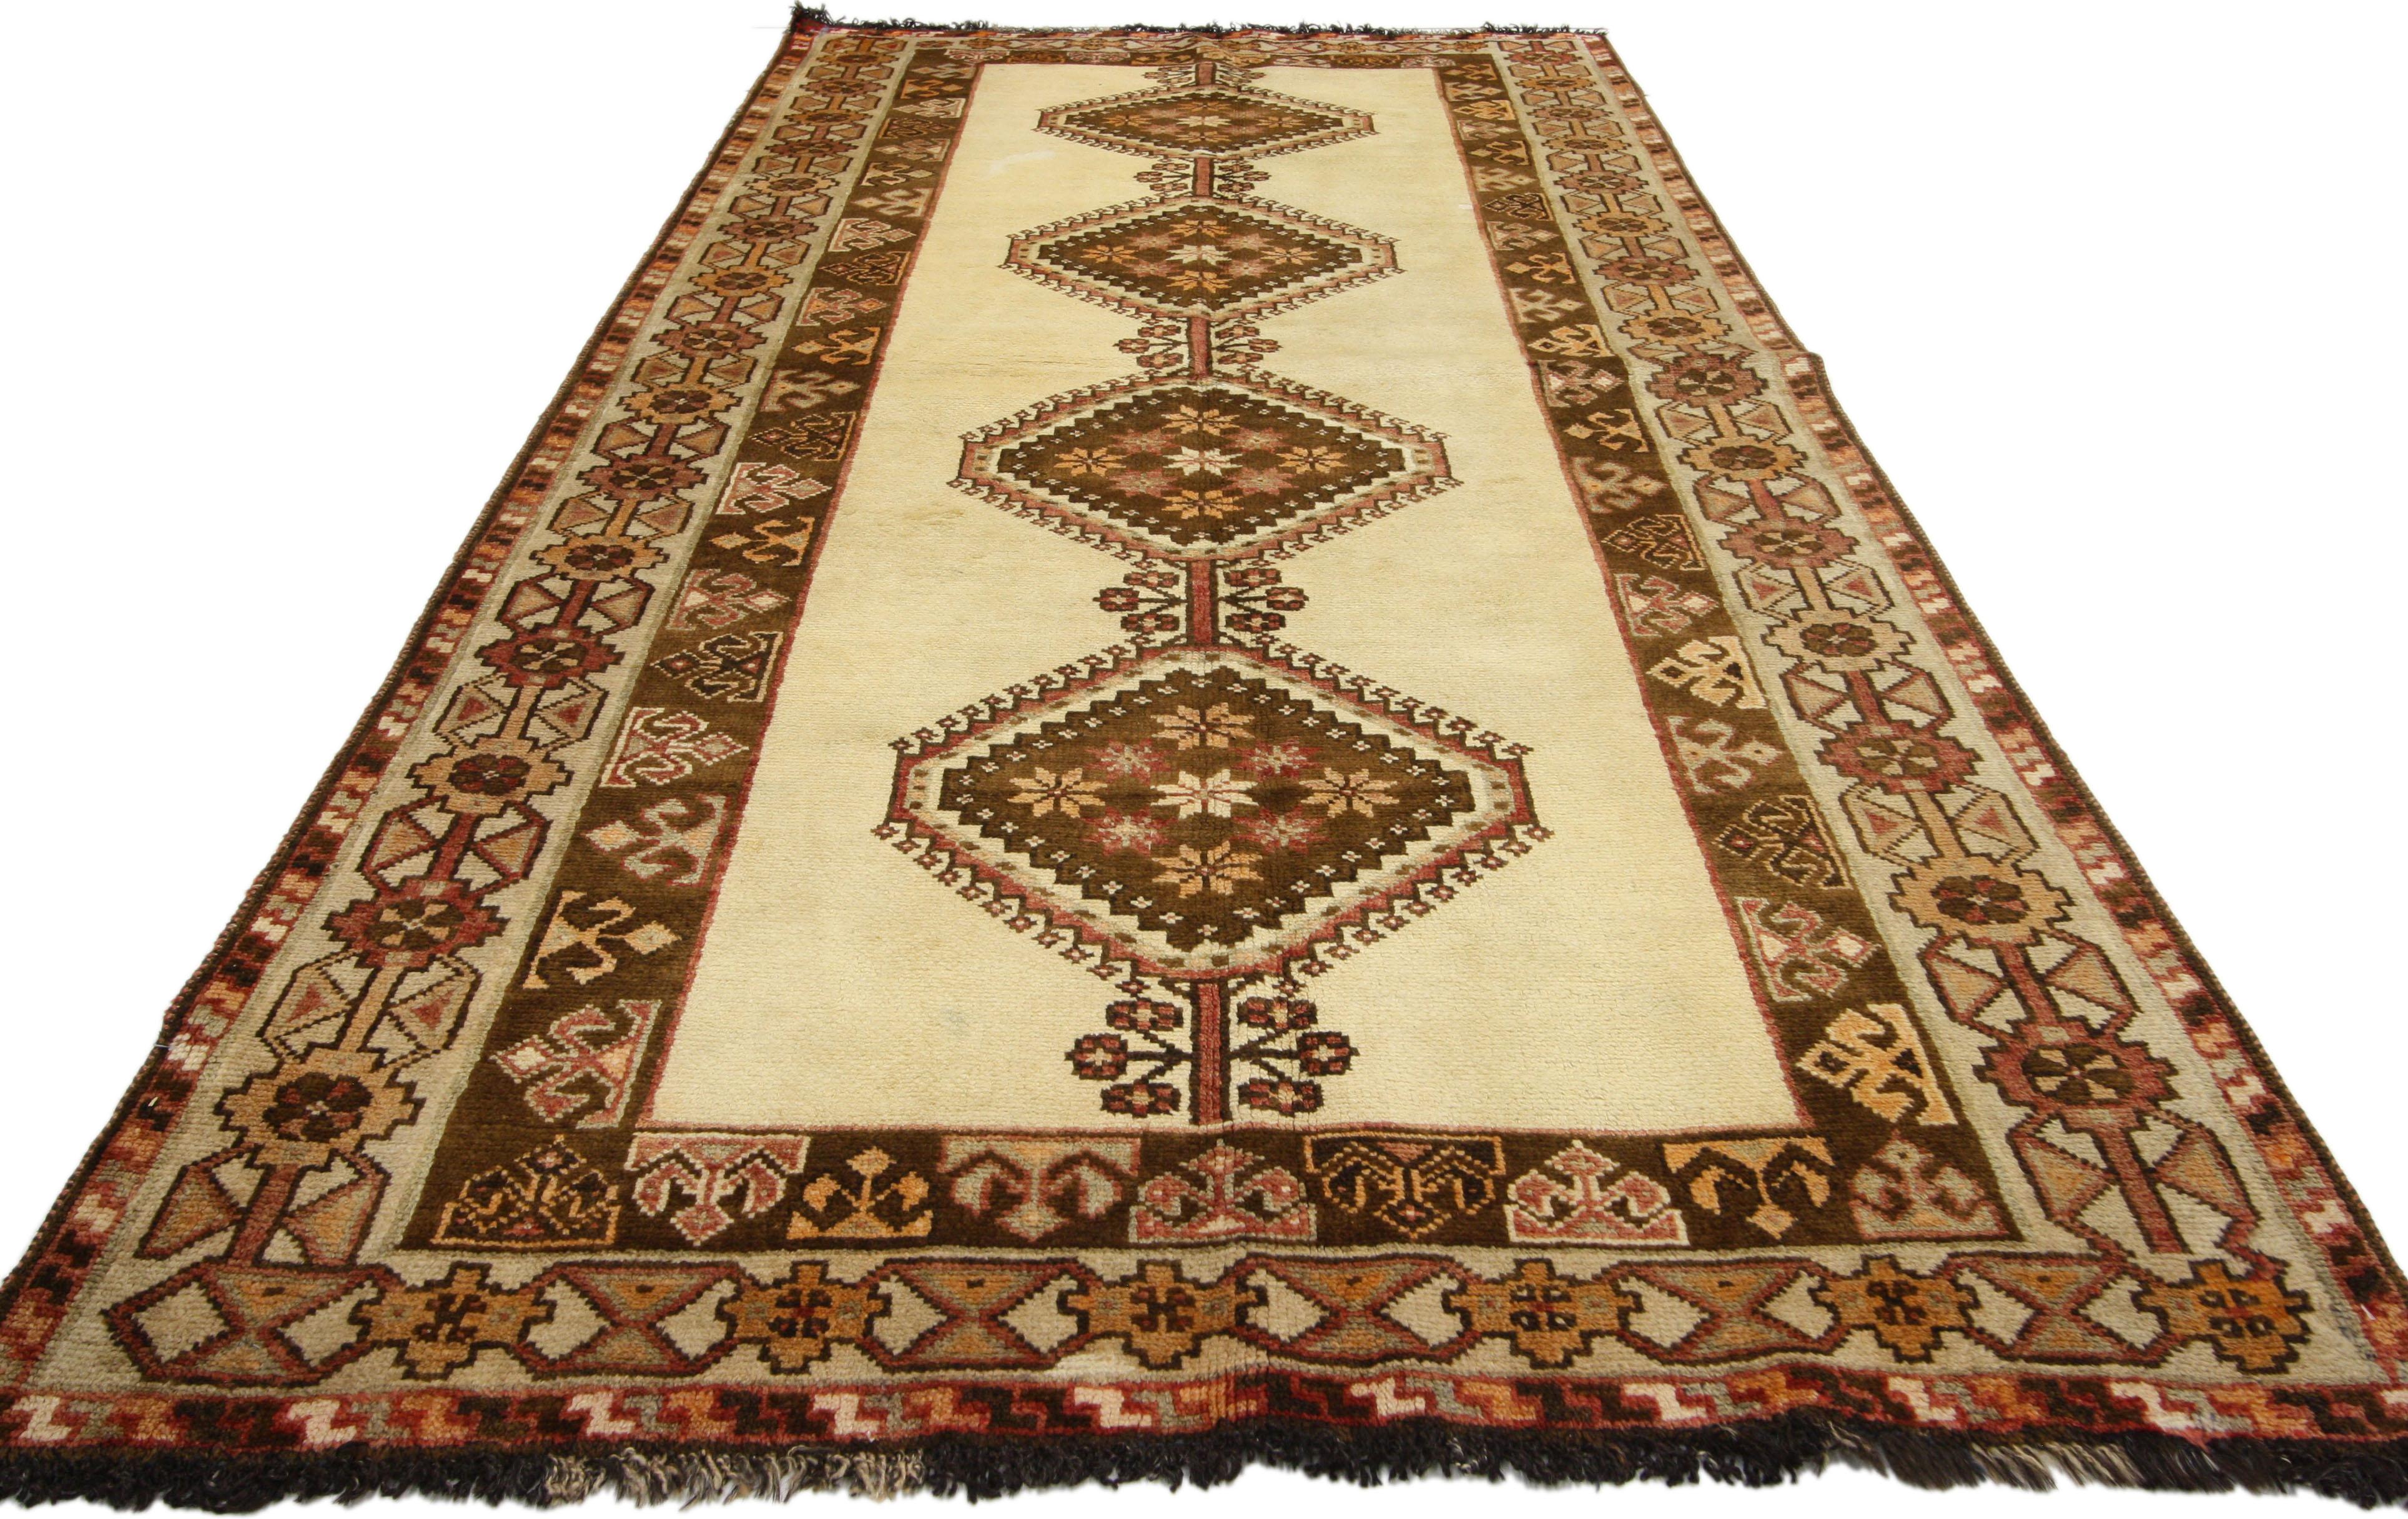 75040 vintage Persian Shiraz Tribal rug with Mid-Century Modern style and Warm Colors. This hand knotted wool vintage Persian Shiraz rug features four repeating, stacked geometric medallions in an open field surrounded by complementary borders. The